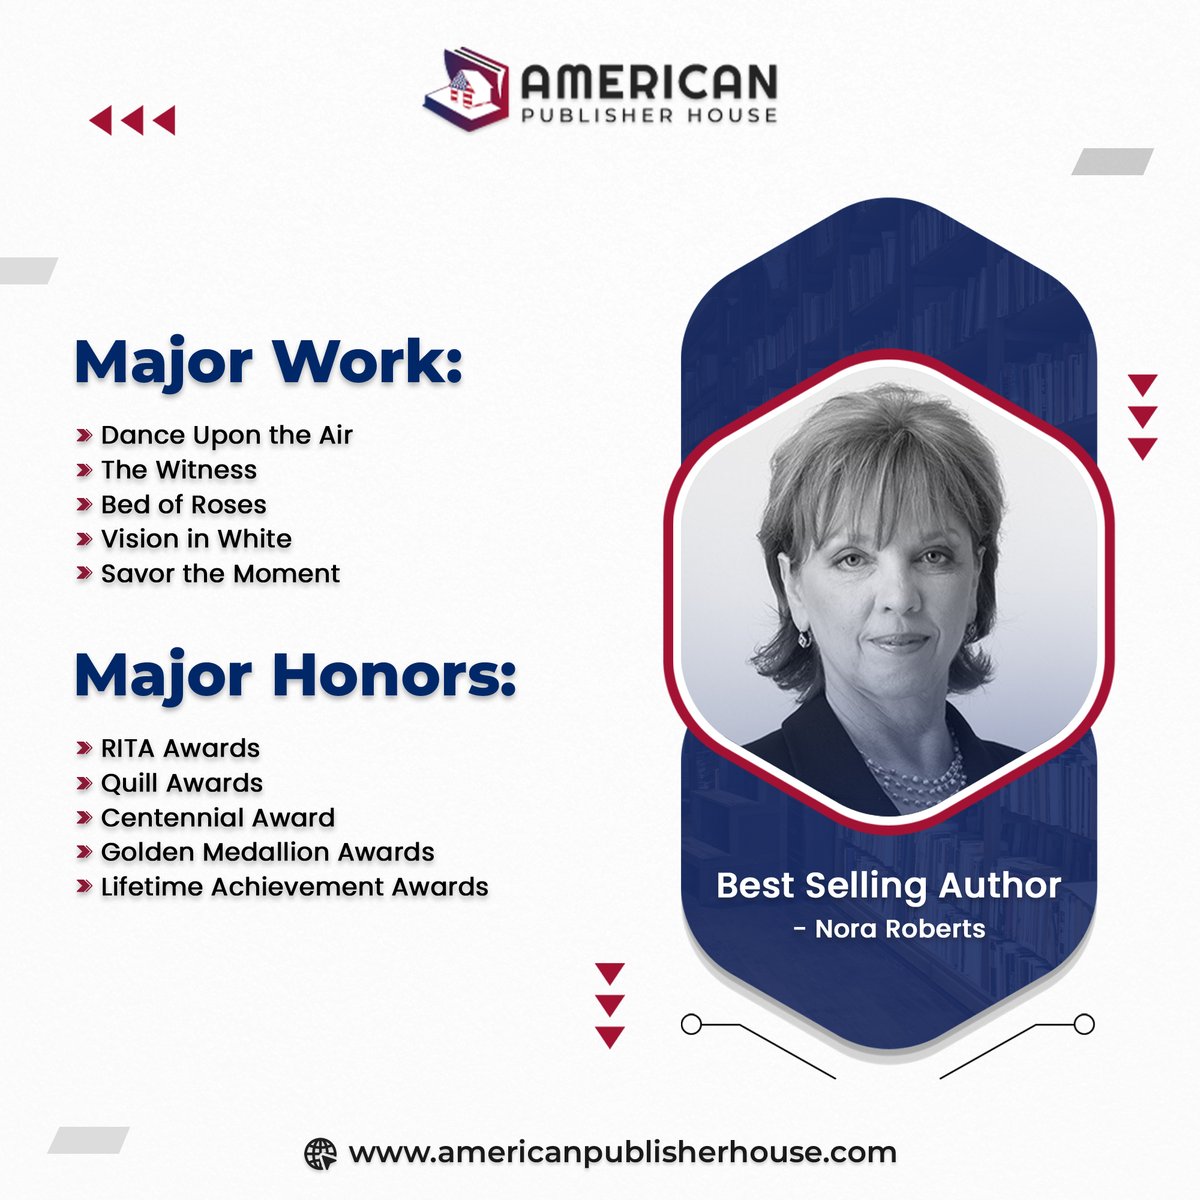 Nora Roberts is a prolific American author renowned for her romance novels, suspenseful thrillers, and gripping mysteries.

For more industry facts and updates, stay tuned with us:
lnkd.in/dveFXmDA
#AmericanPublisherHouse #NoraRoberts #BestSellingAuthor #Author